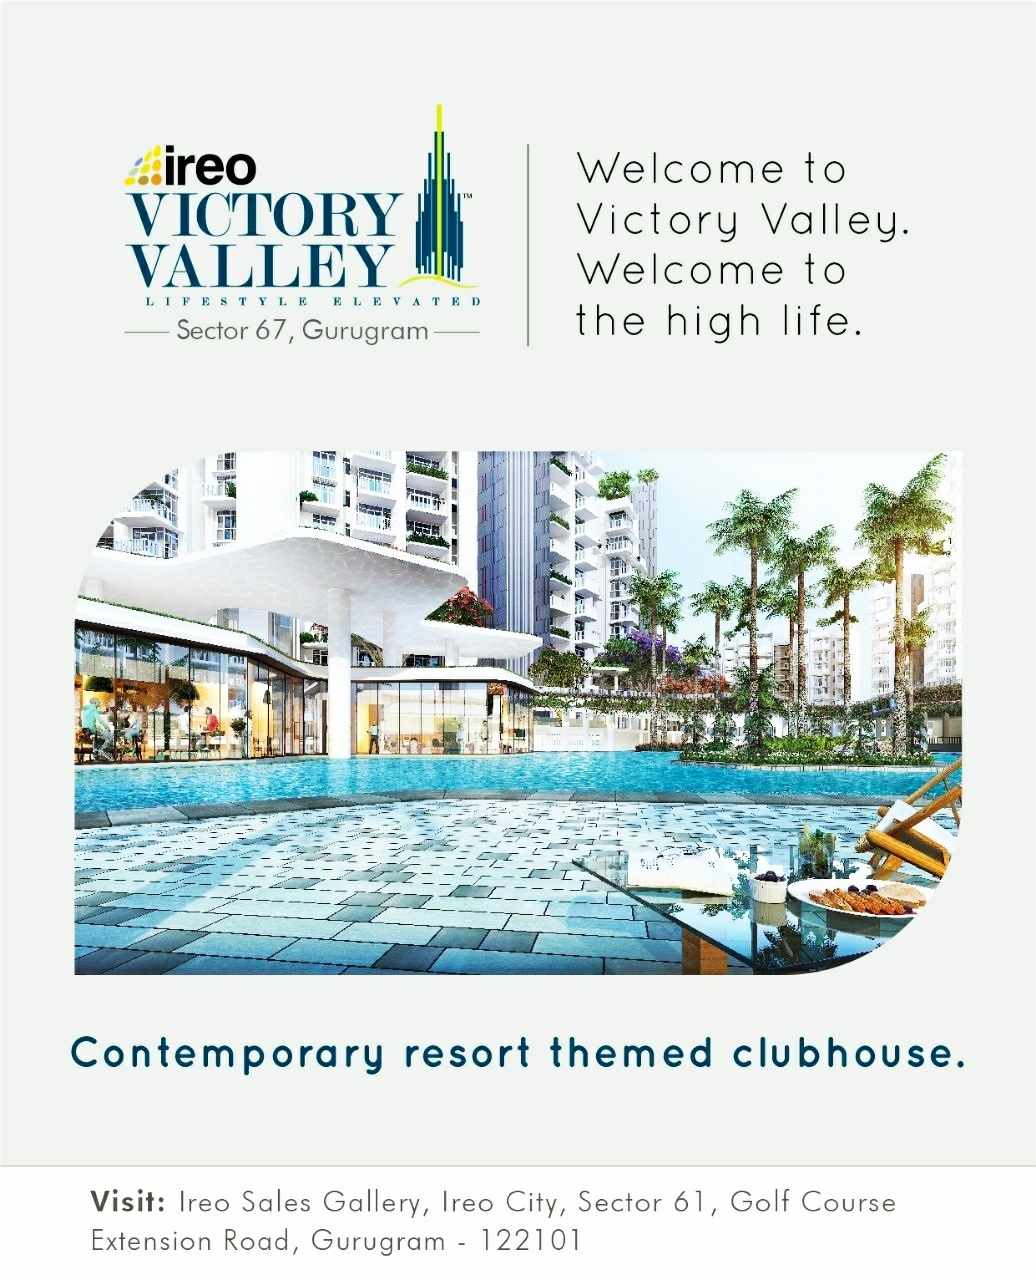 Enjoy in contemporary resort themed clubhouse at Ireo Victory Valley in Gurgaon